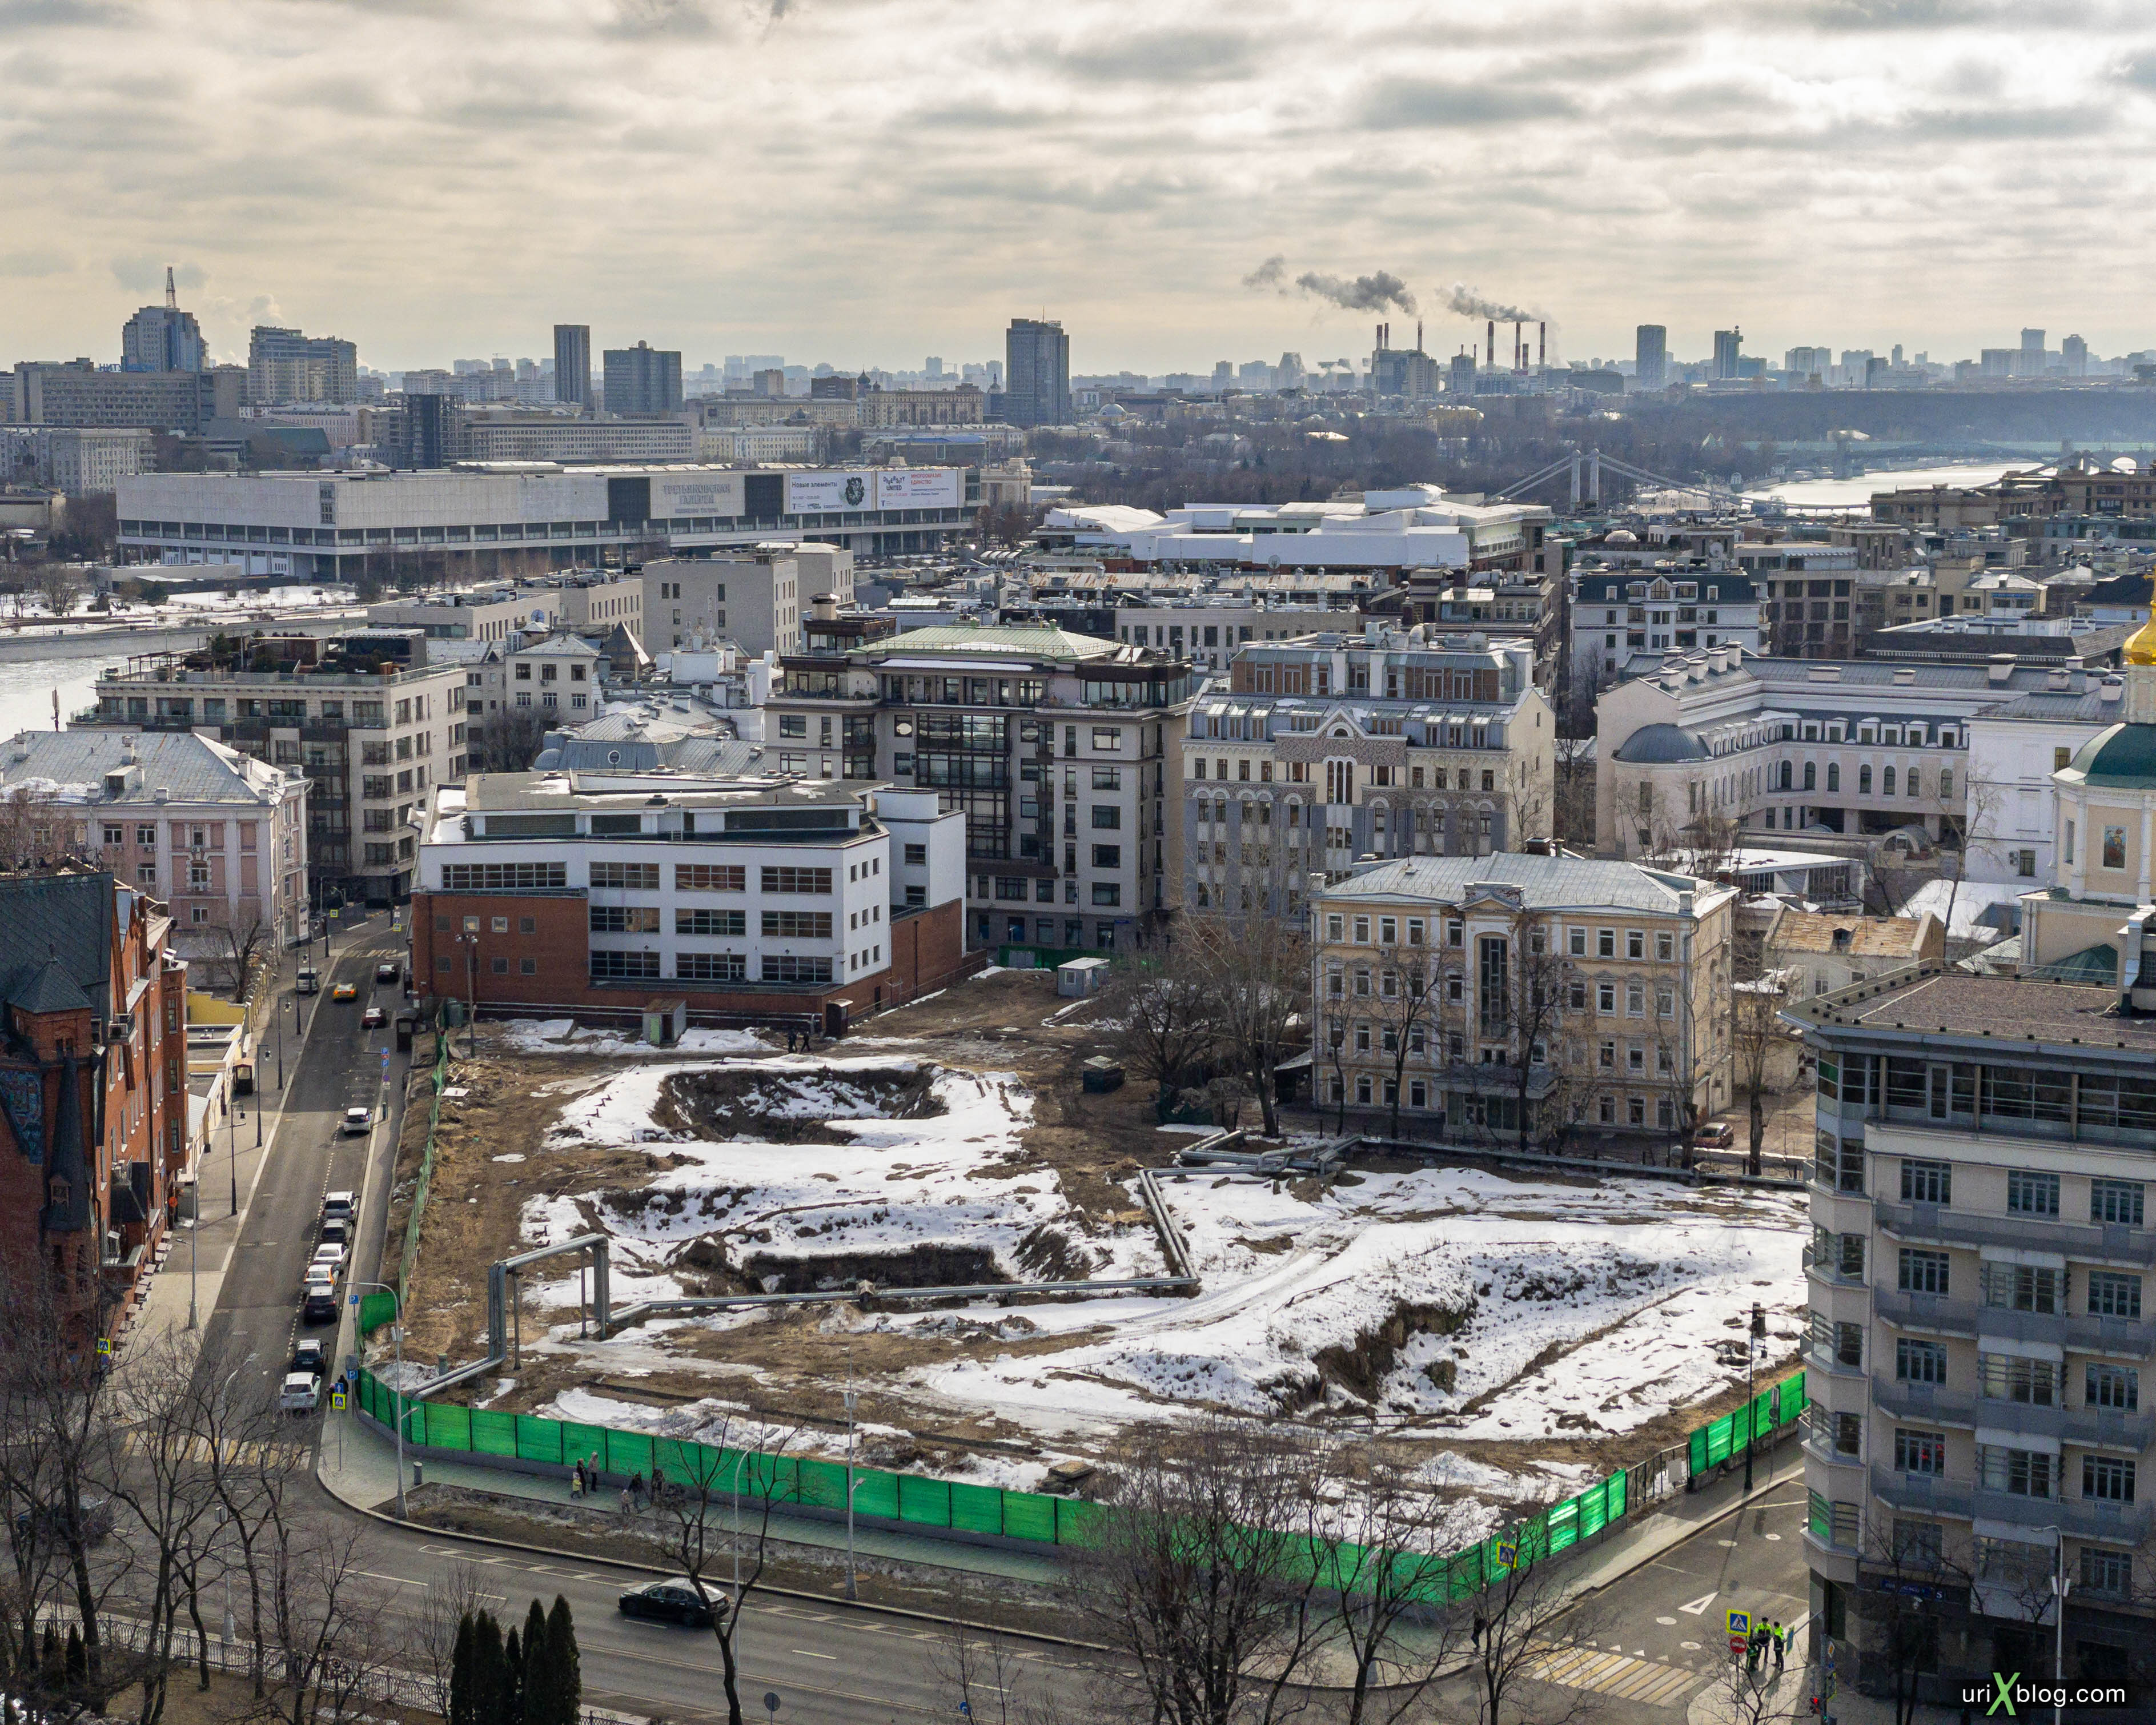 Cathedral of Christ the Saviour, CCS, observation deck, panorama, city, Moscow, Russia, Display P3